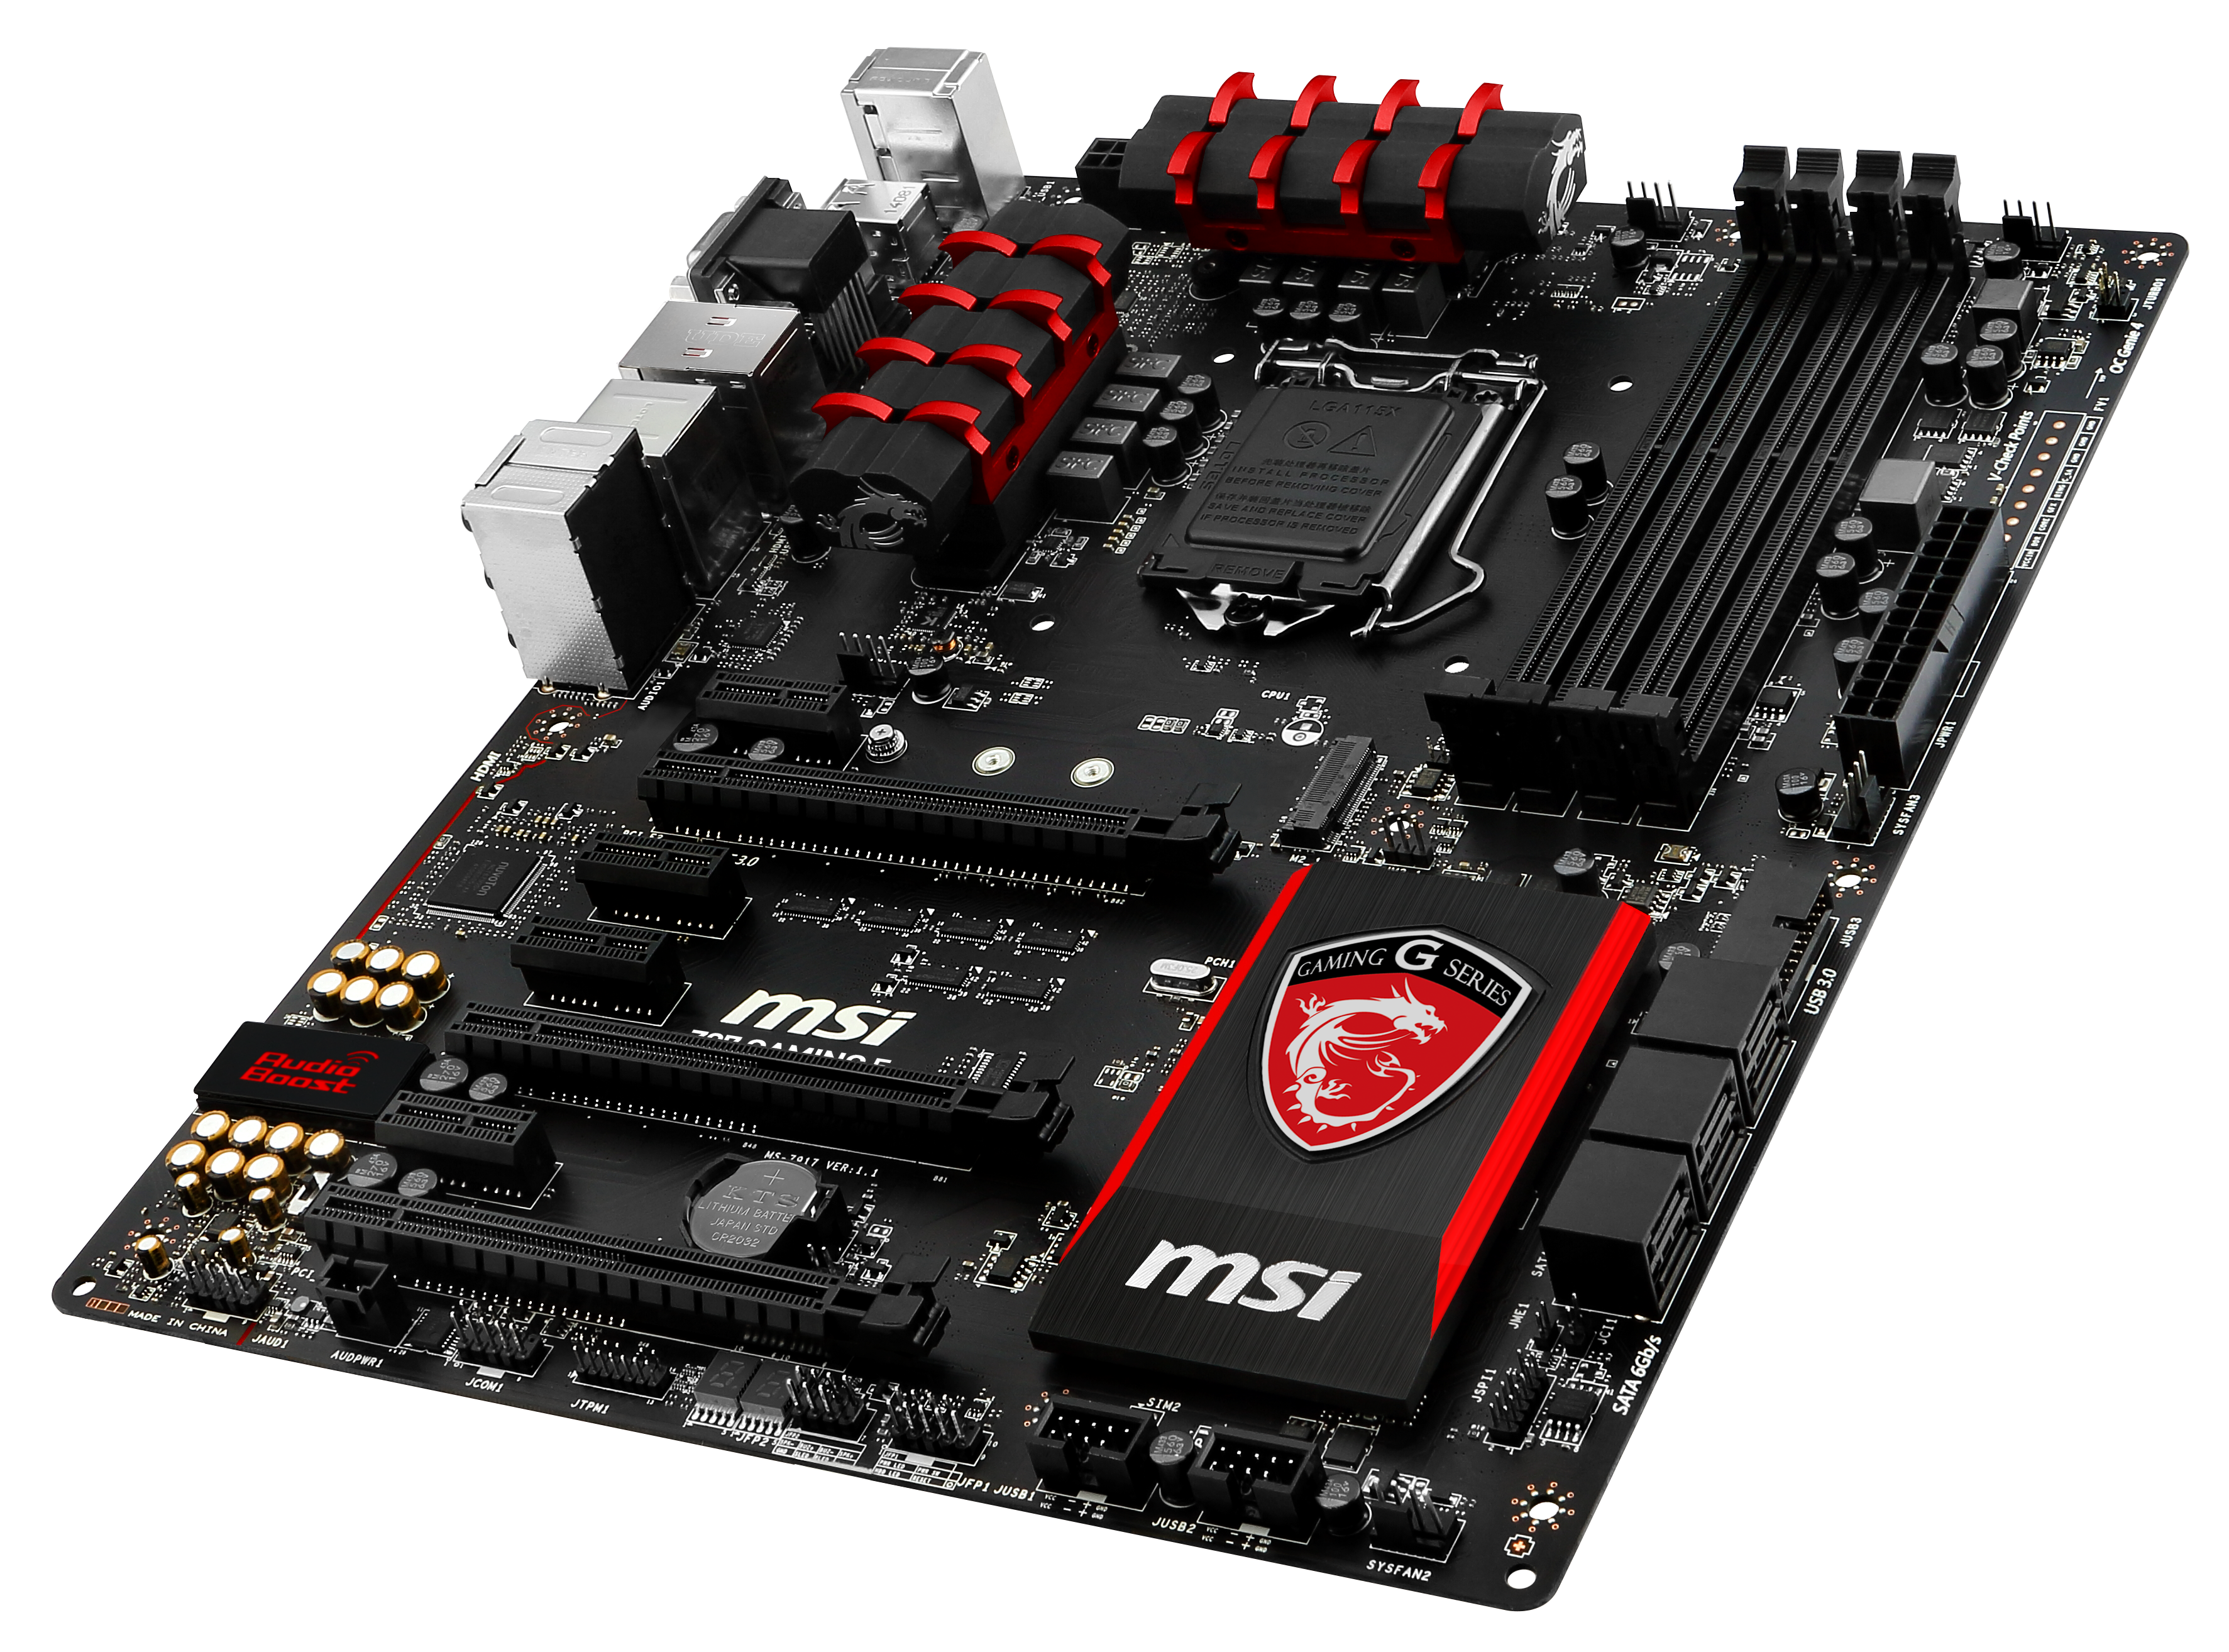 MSI Z97 Gaming 5 Motherboard Review: Five is